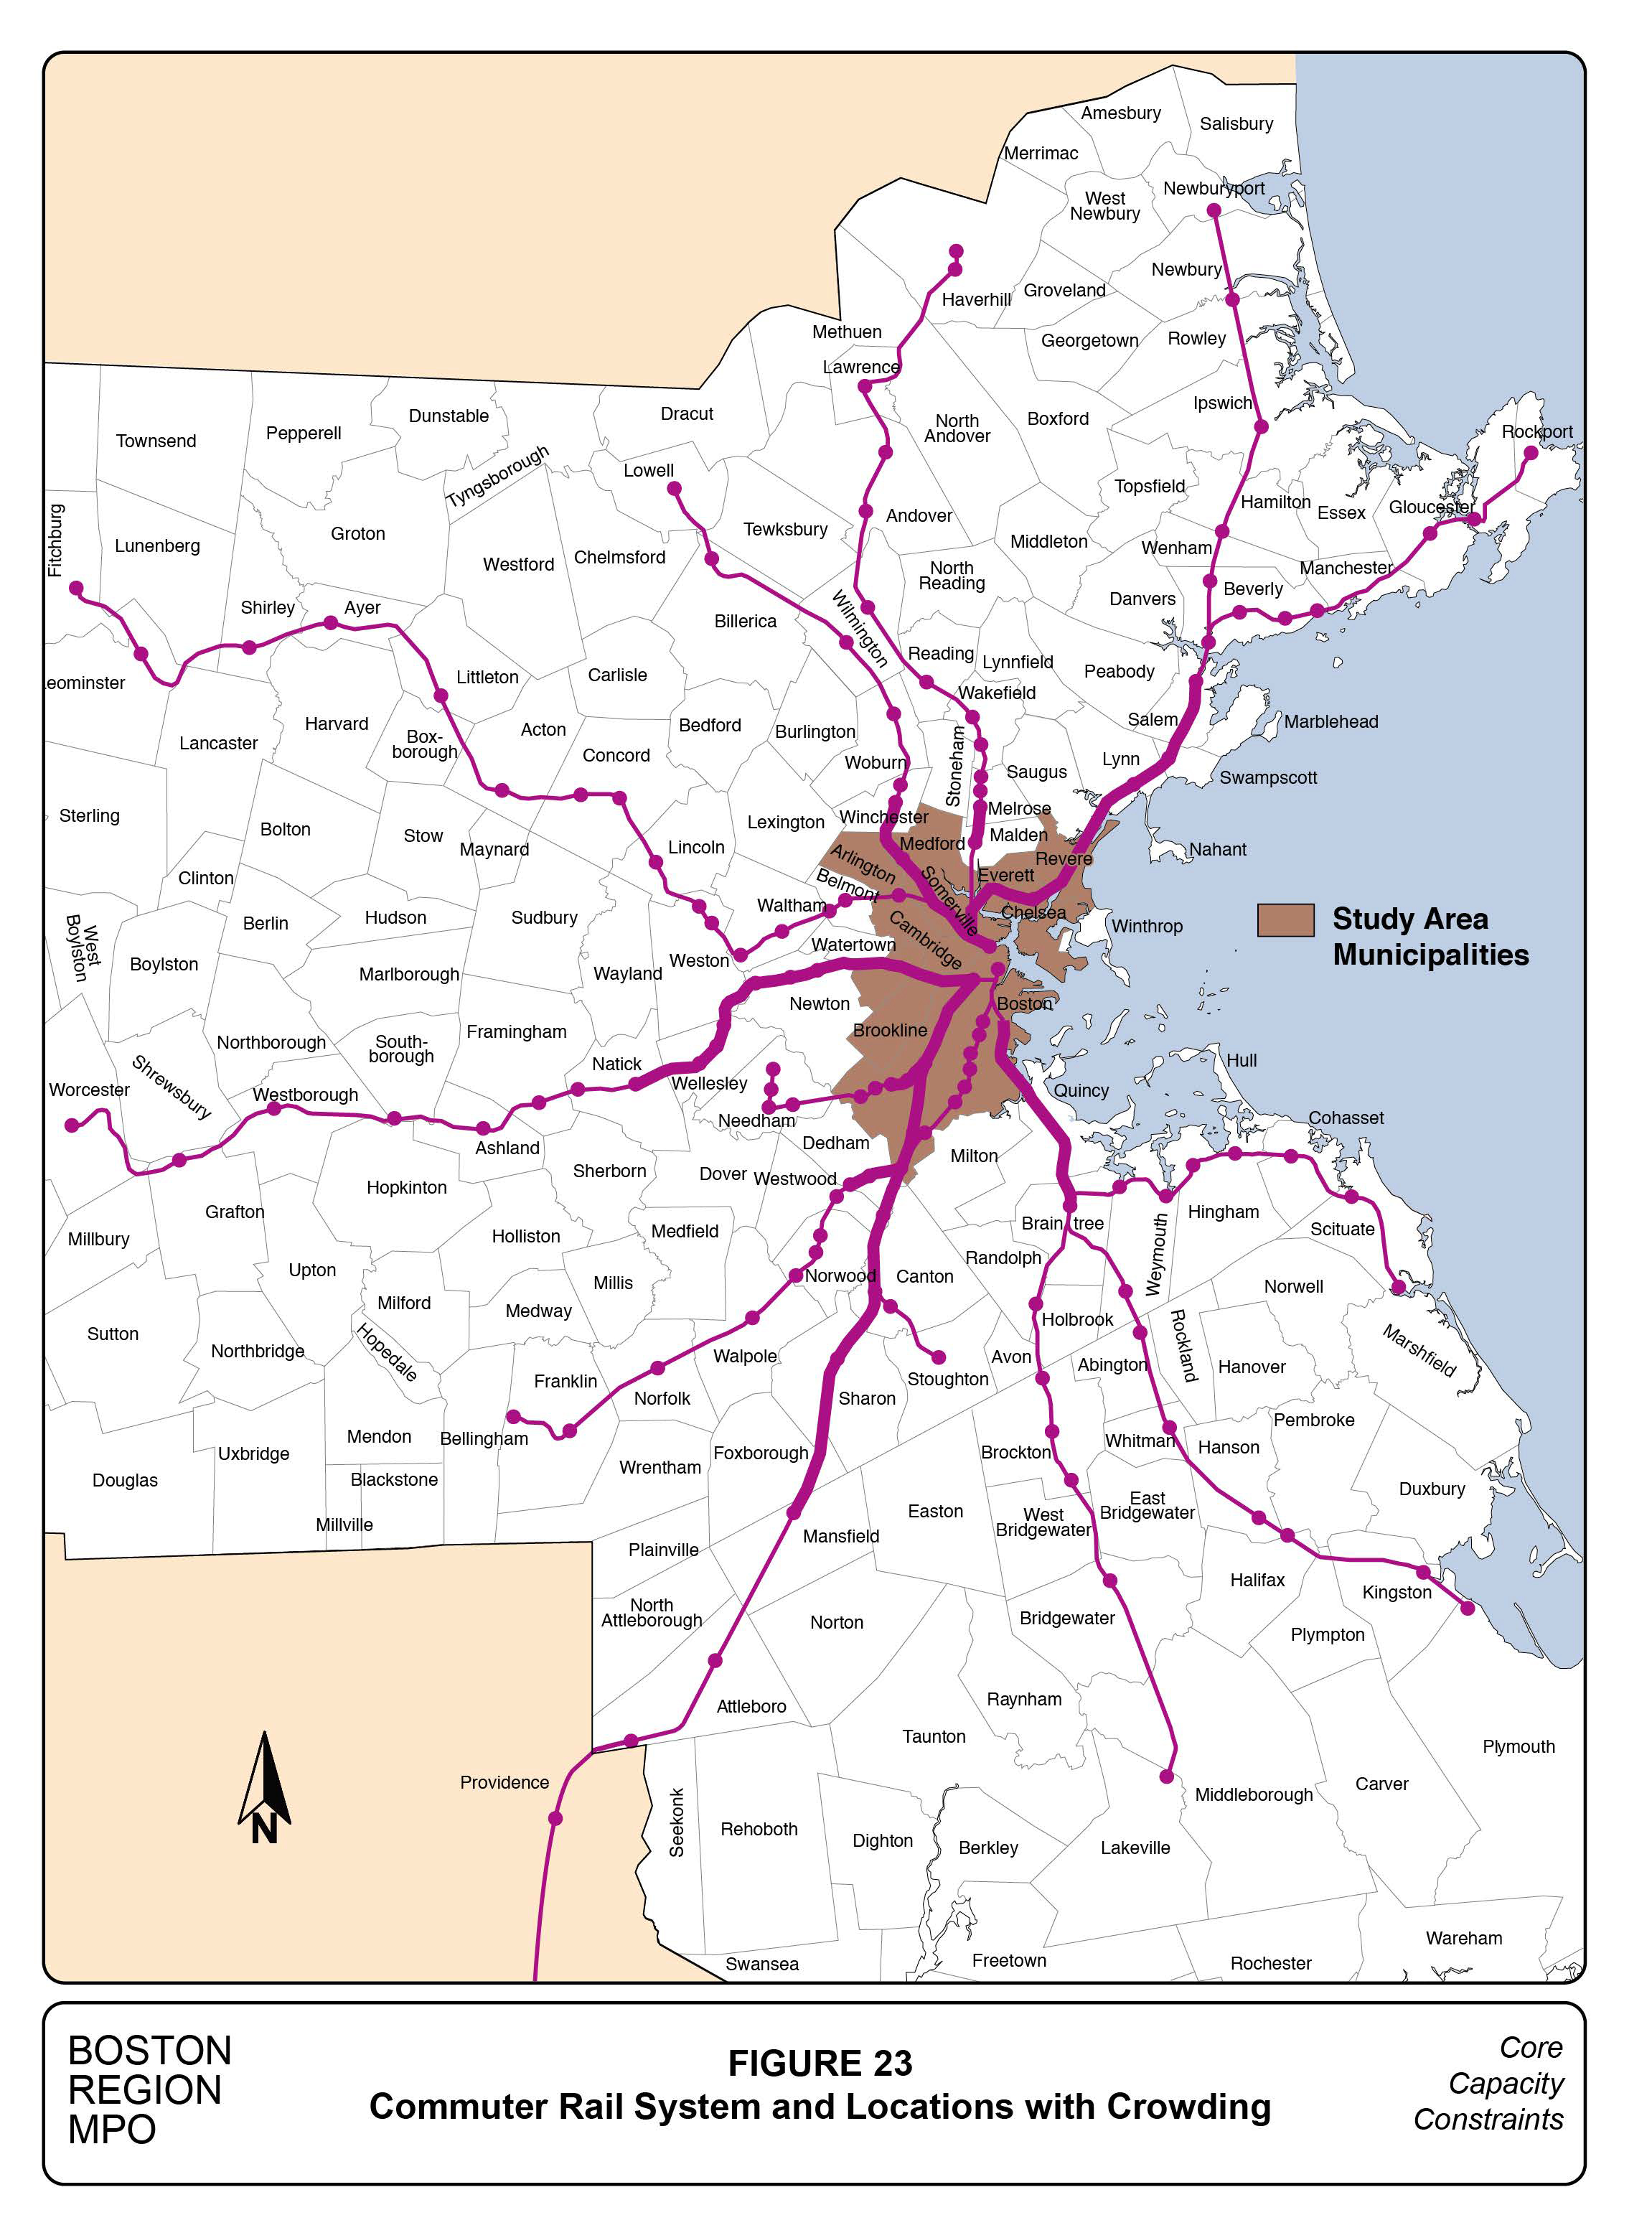 Figure 23 is a map of eastern Massachusetts. The commuter rail system is shown and the parts of the system that experience peak-period crowding are highlighted.